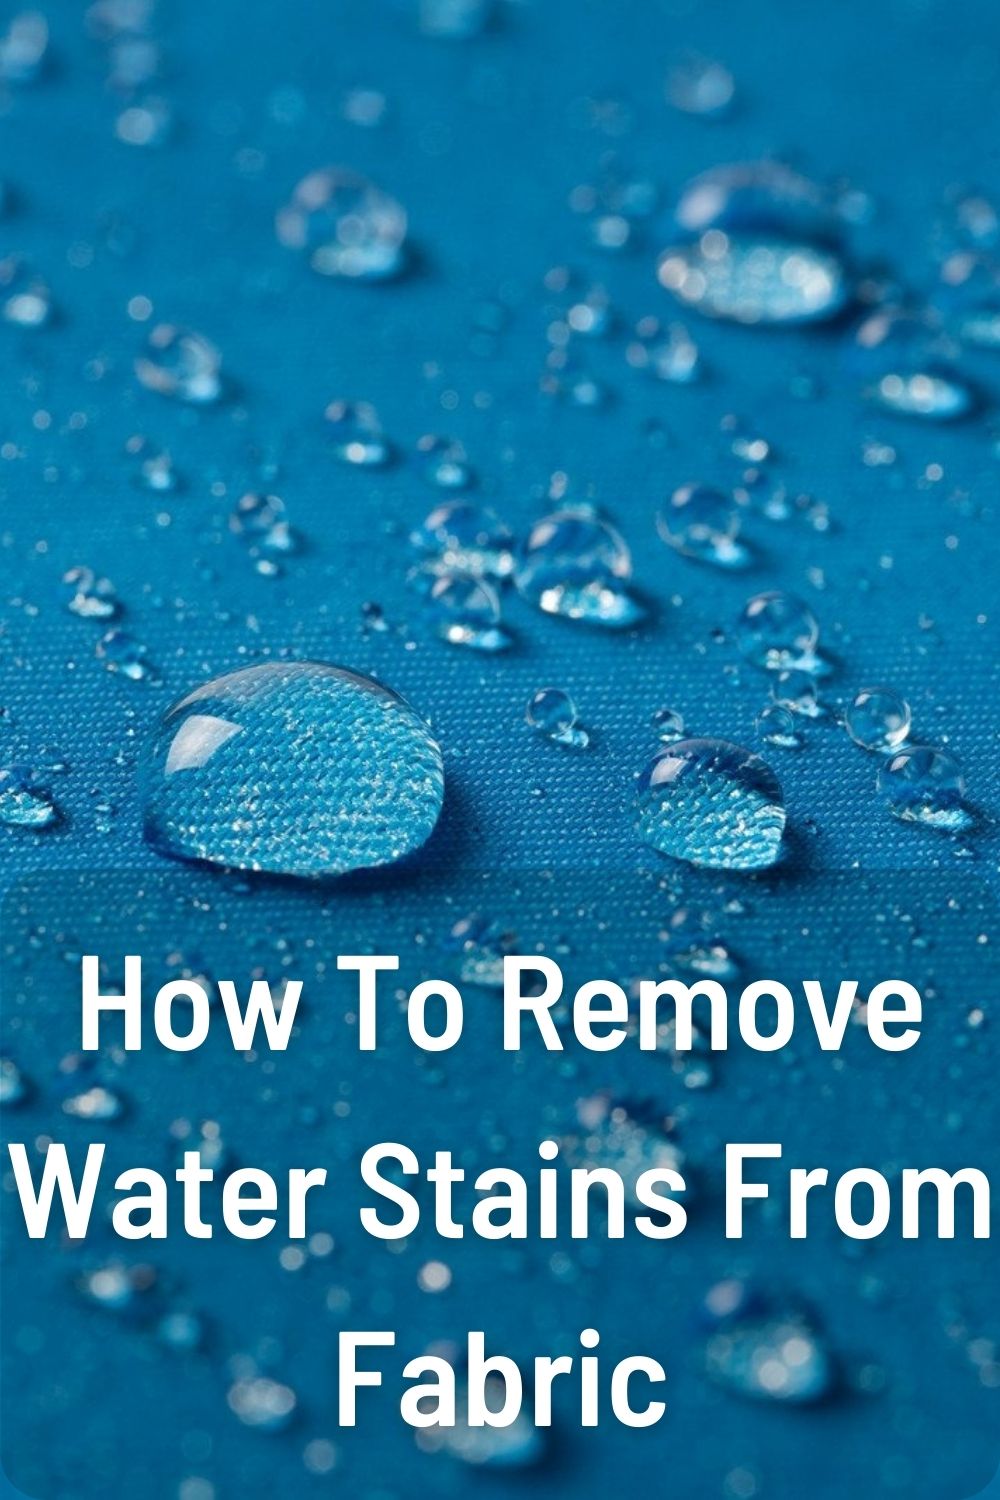 How To Remove Water Stains From Fabric